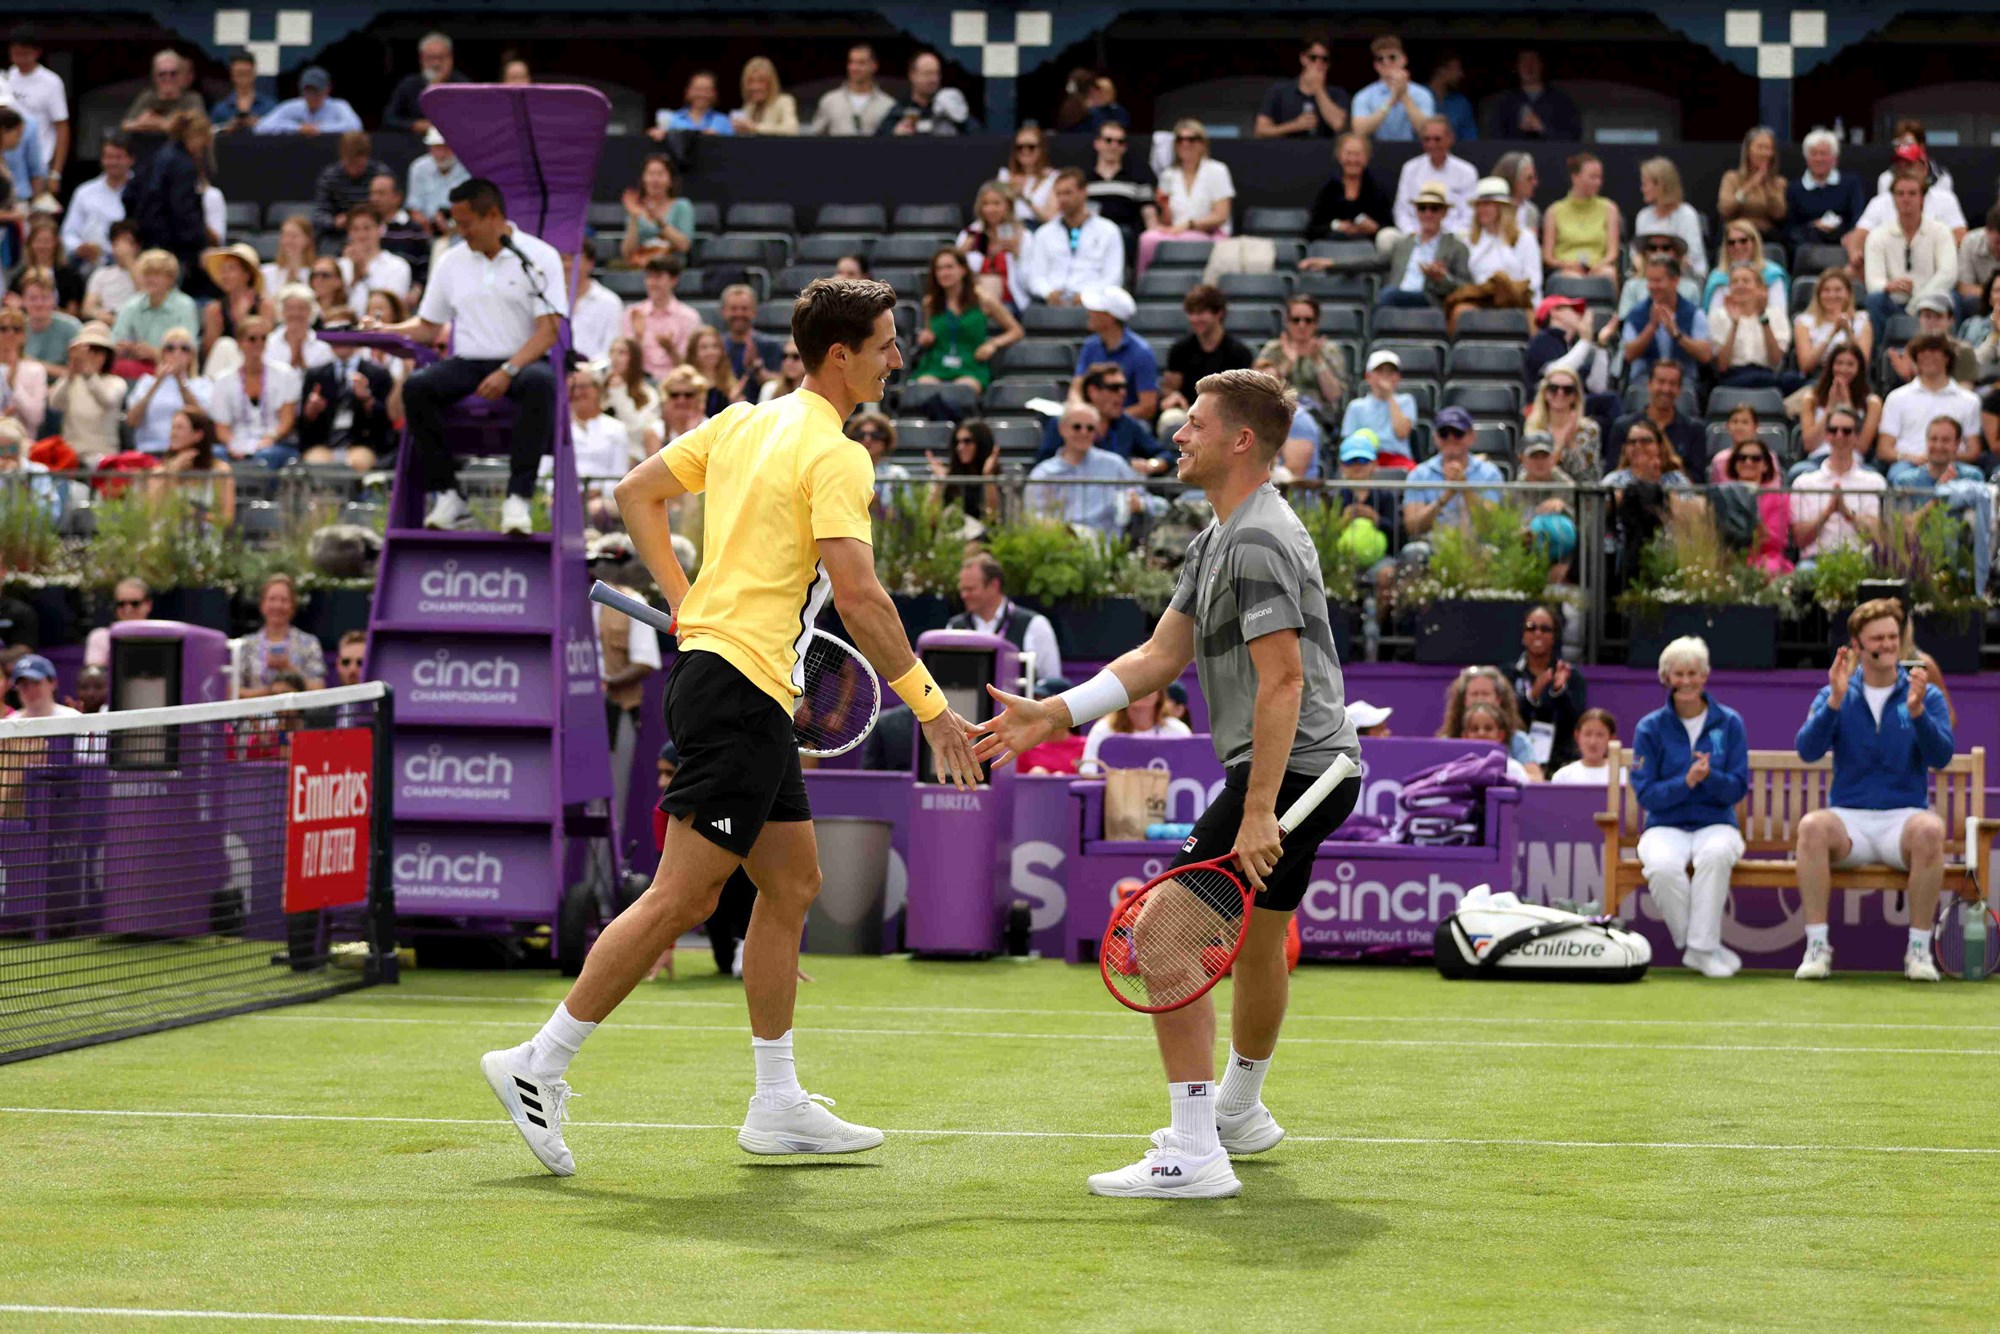 Neal Skupski and Joe Salisbury high-fiving each other on court at the cinch Championships during the fan day exhibition match